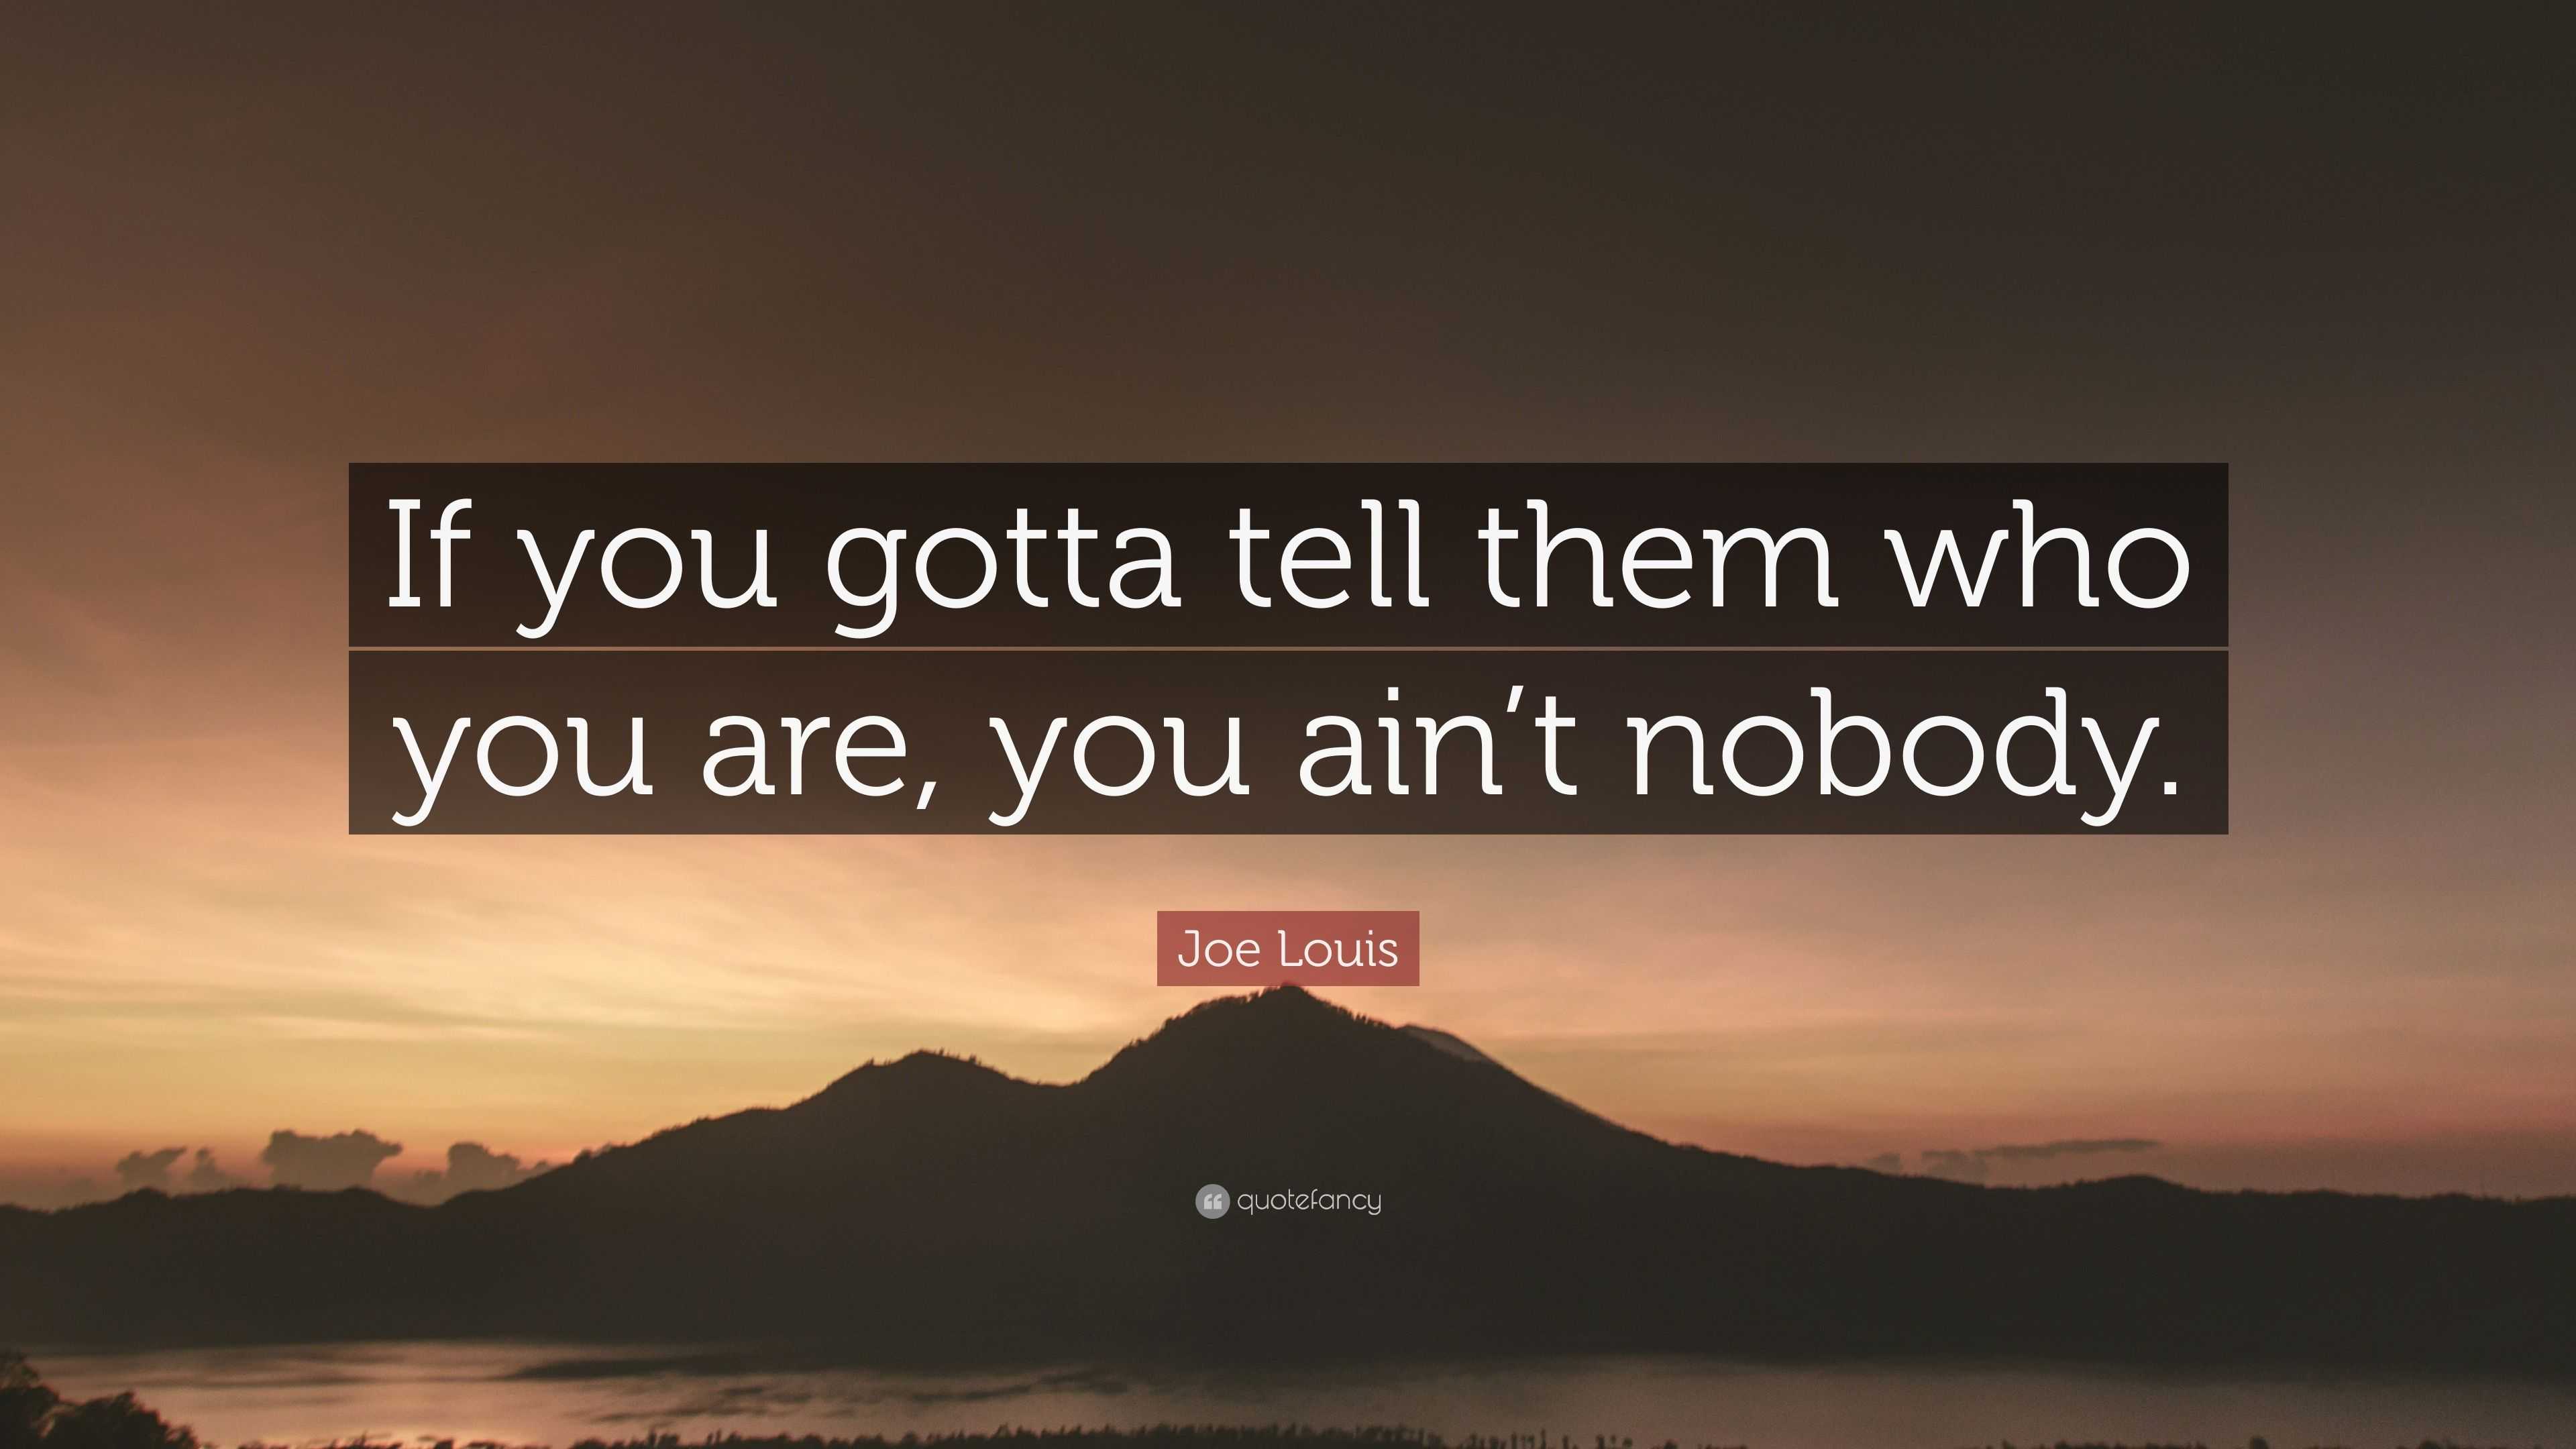 Joe Louis Quote: "If you gotta tell them who you are, you ain't nobody."